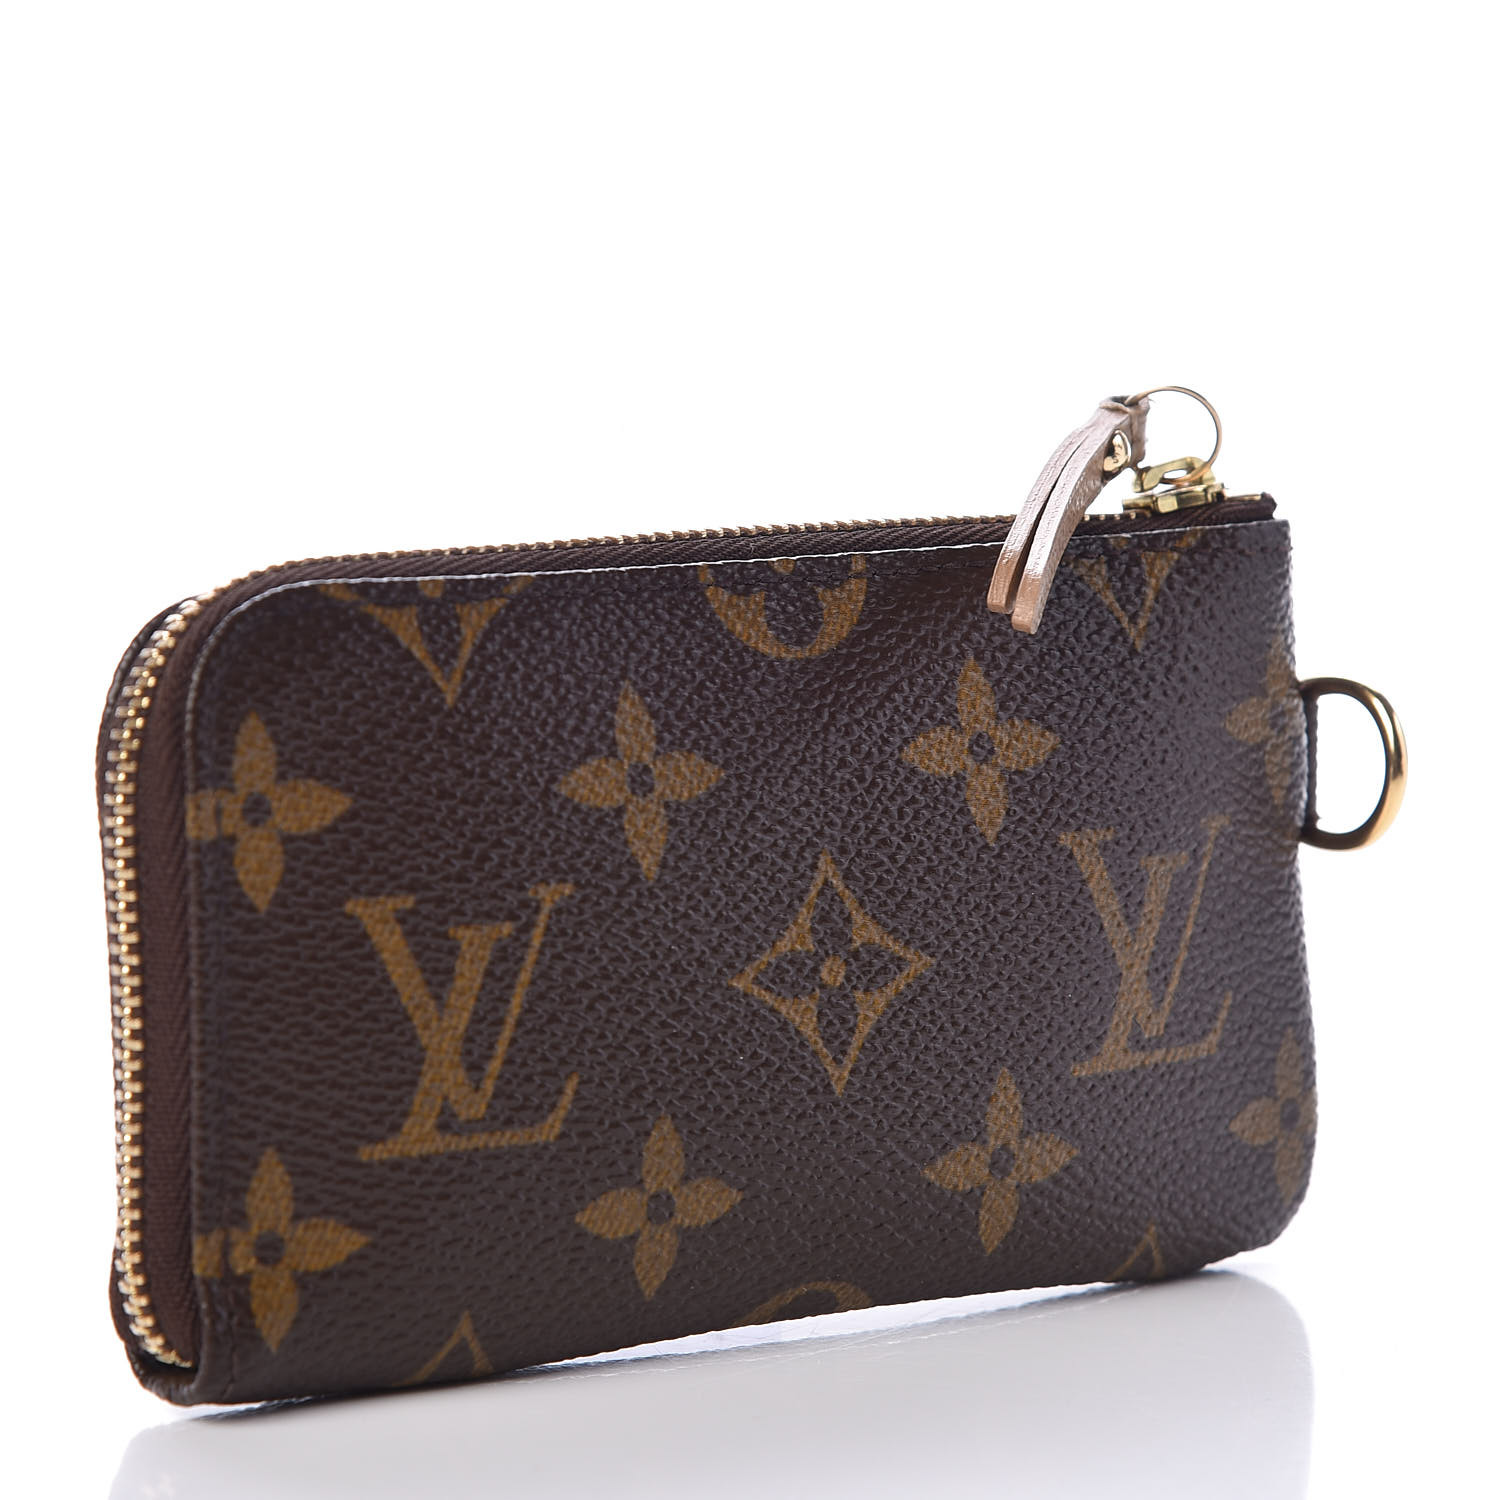 LOUIS VUITTON Monogram Complice Trunks and Bags Key Pouch 449215